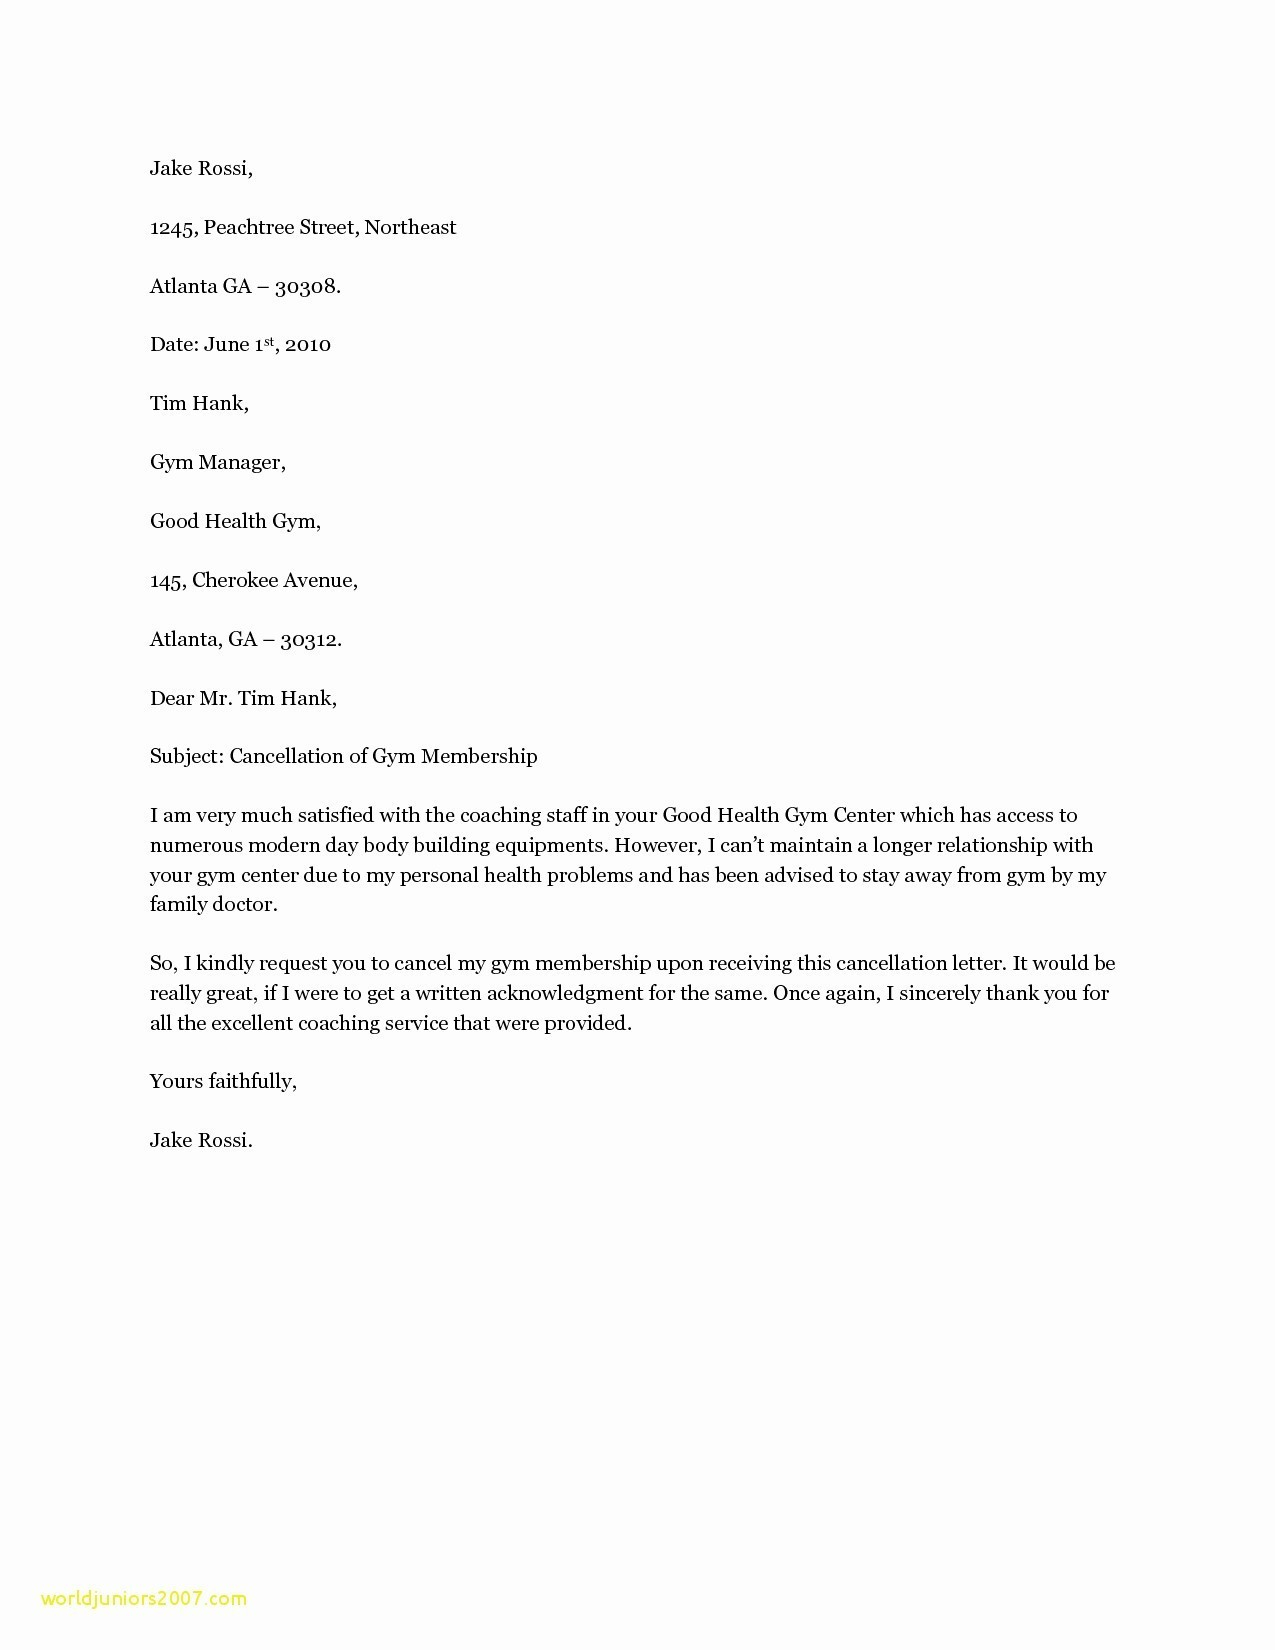 Gym Membership Cancellation Letter Template Free - Gym Cancellation Letter format Save Best Gym Membership Cancellation